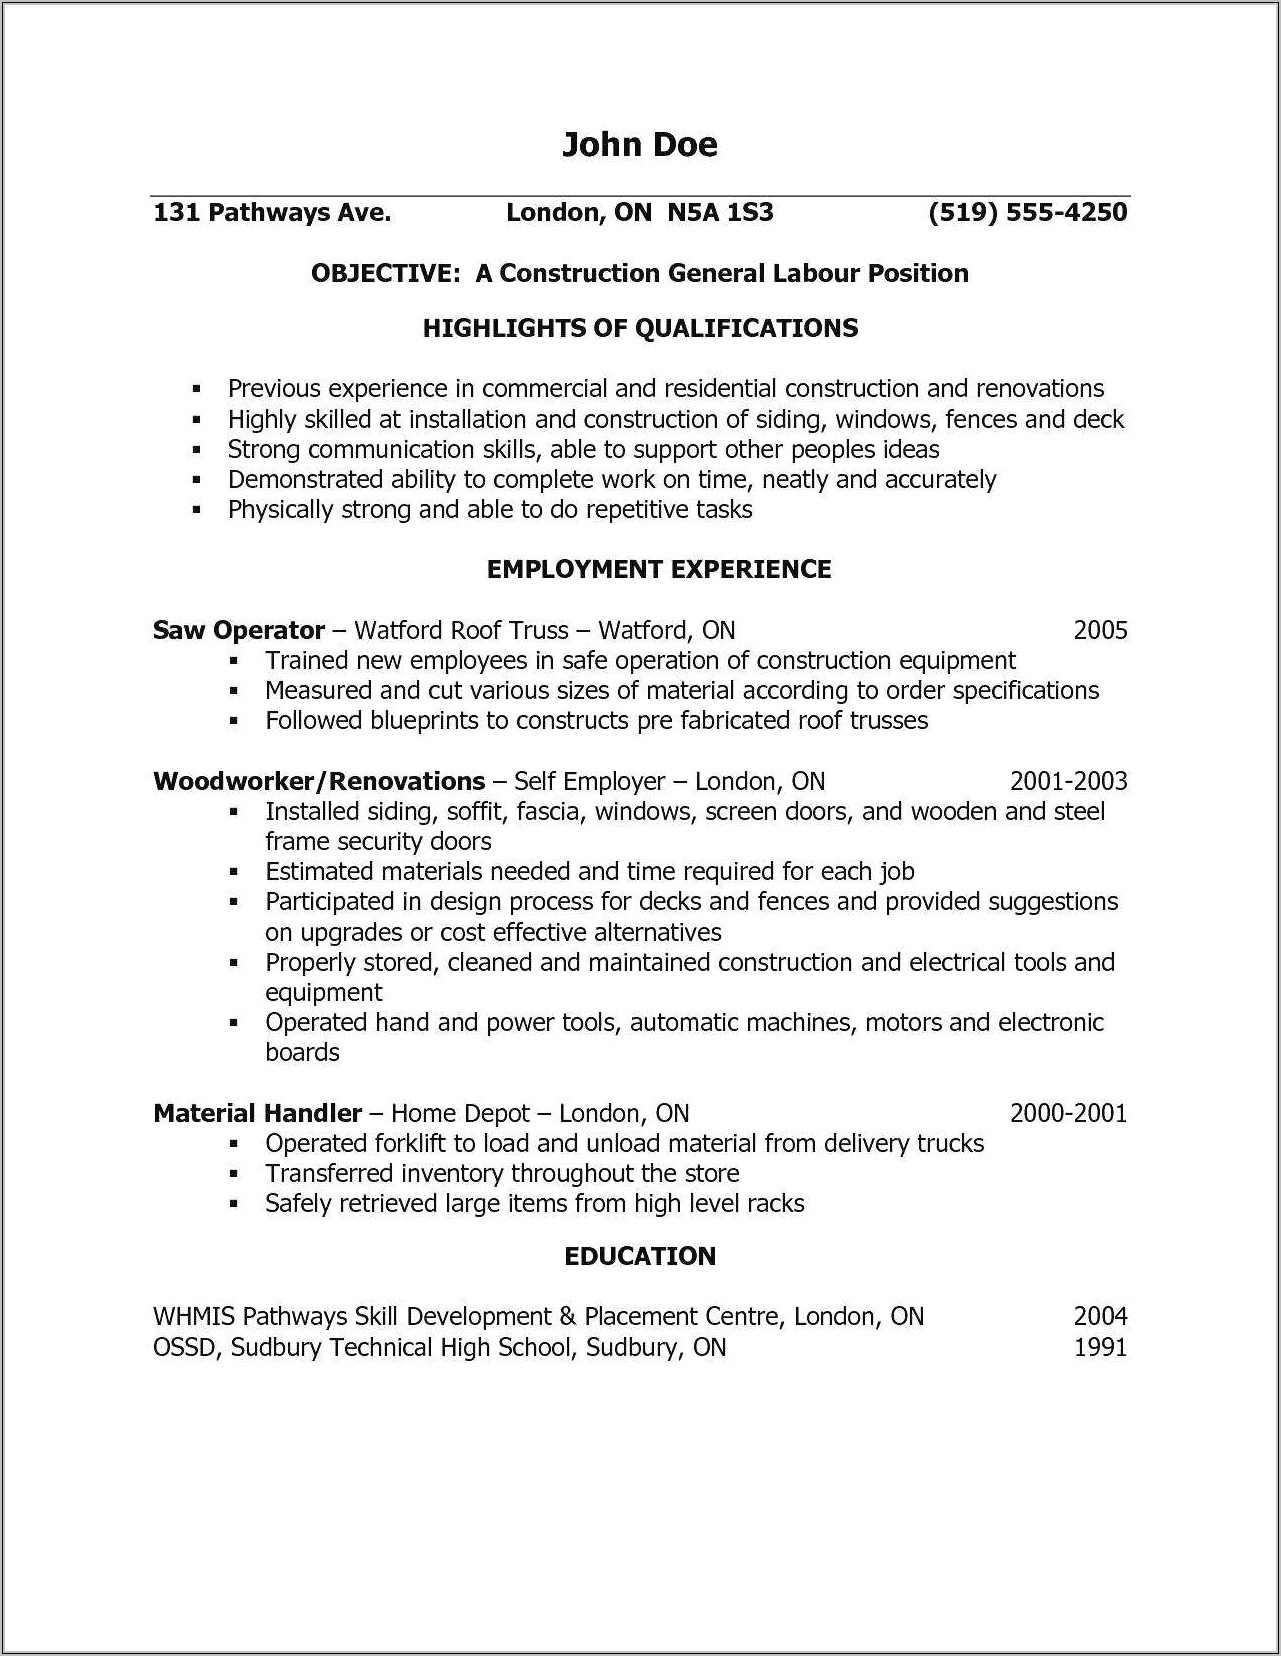 Examples Skills And Abilities For Resume Laborer